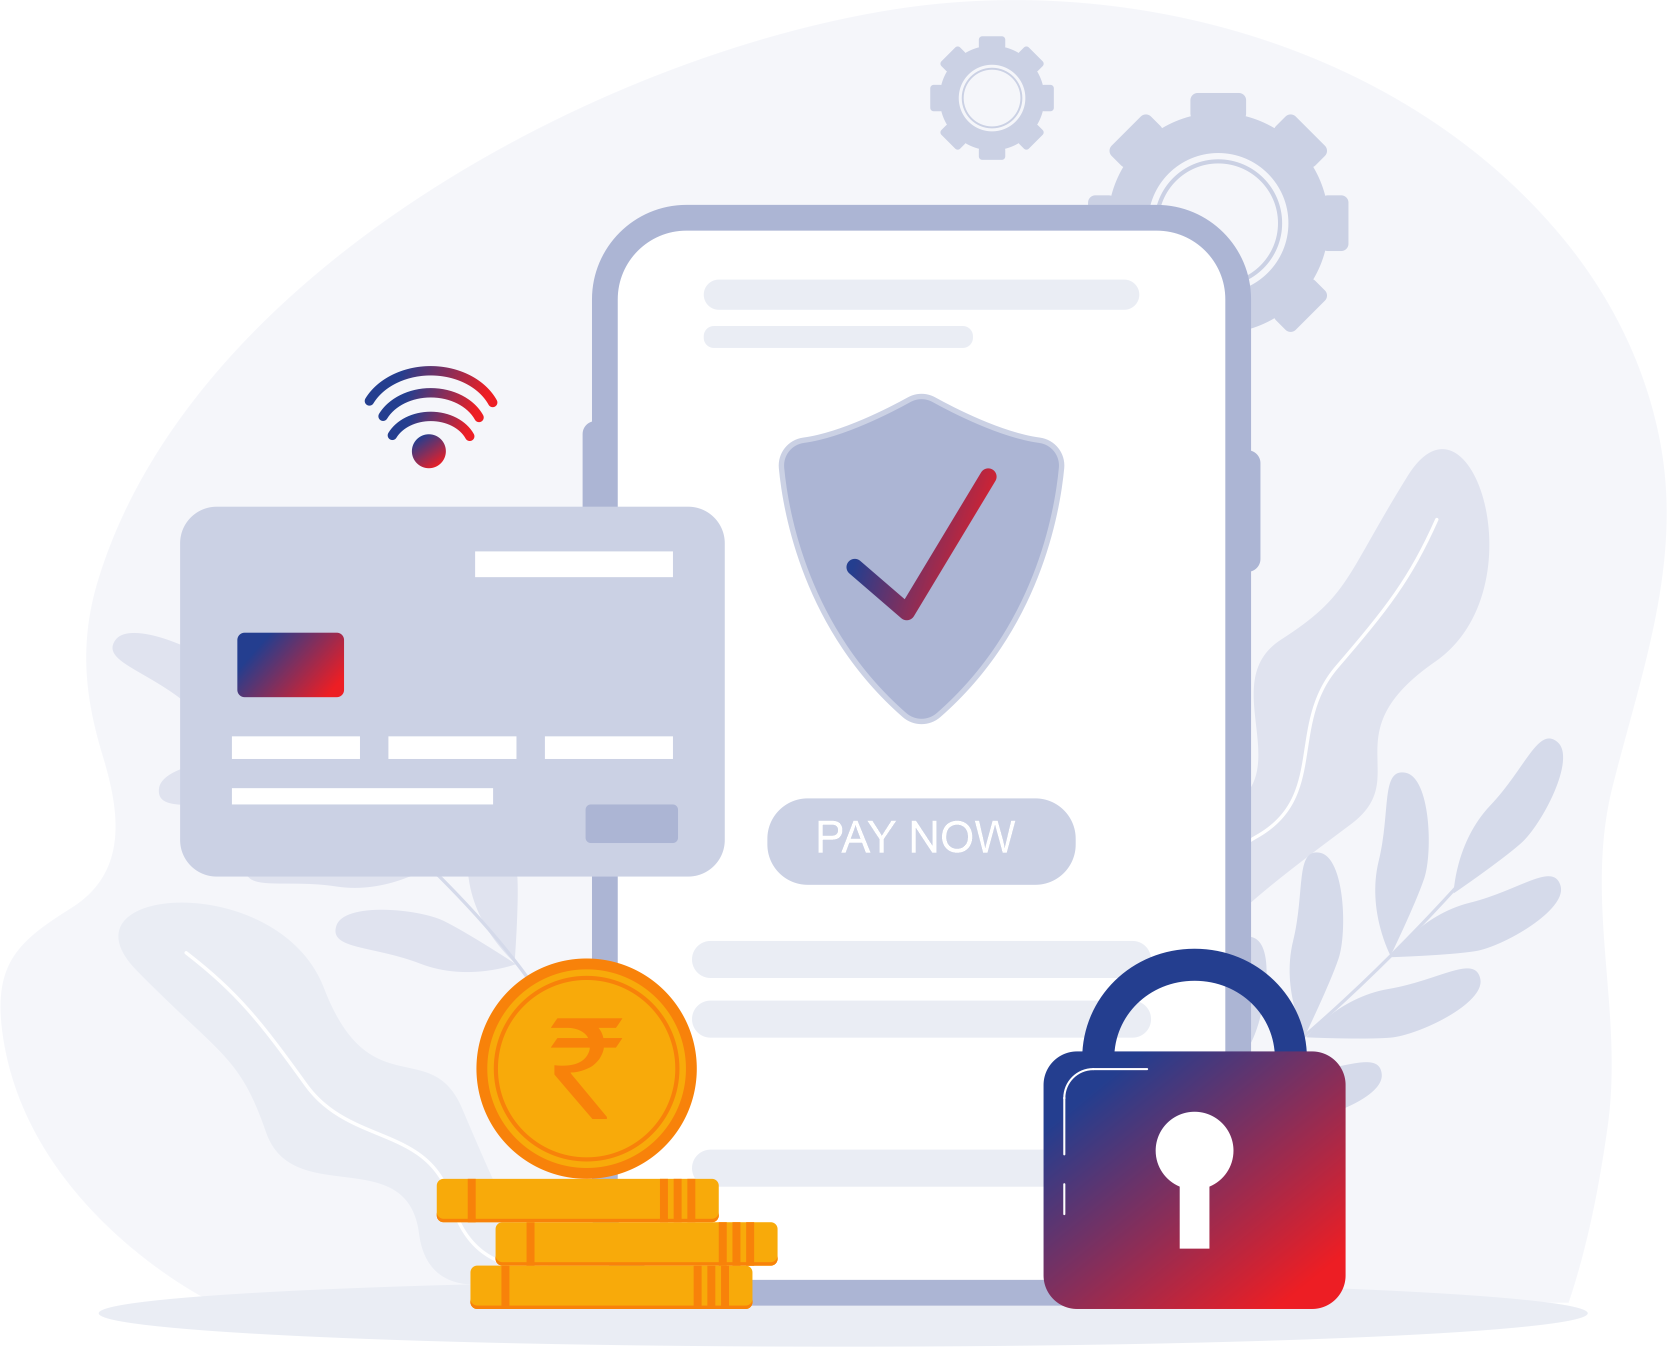 Secure and hassle-free payments for businesses